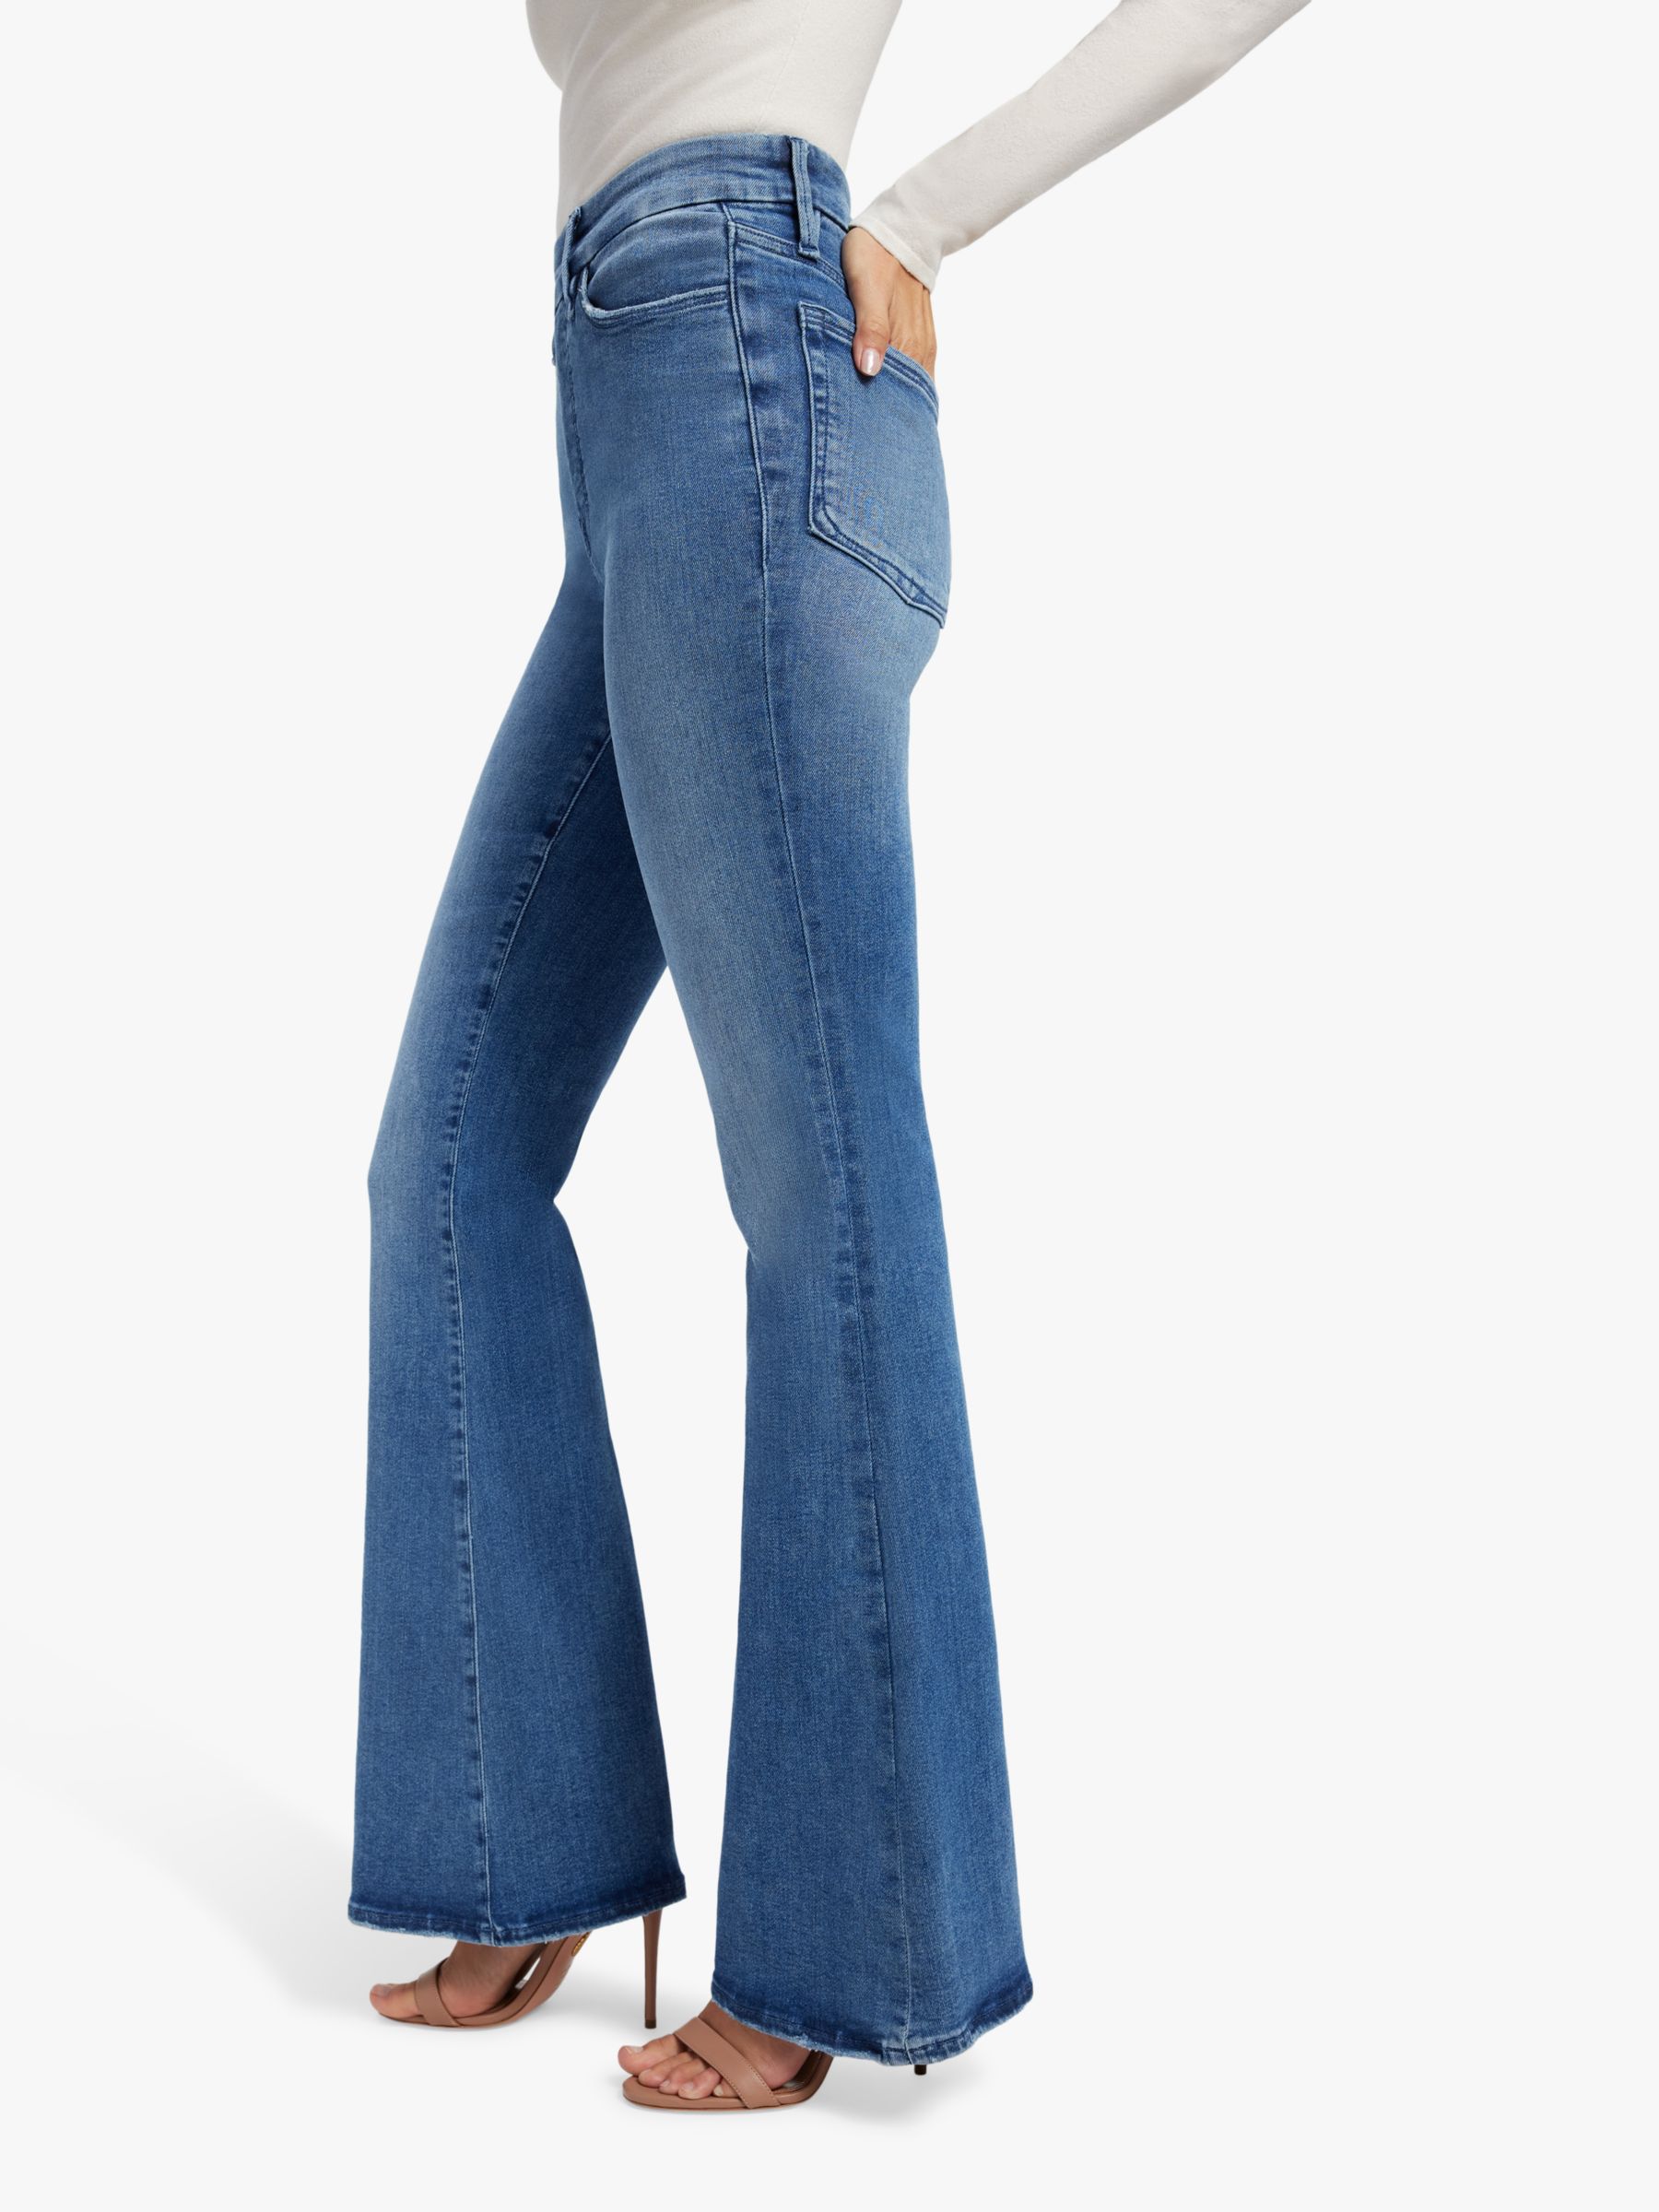 Buy Good American Pull On Flared Jeans, Indigo Online at johnlewis.com